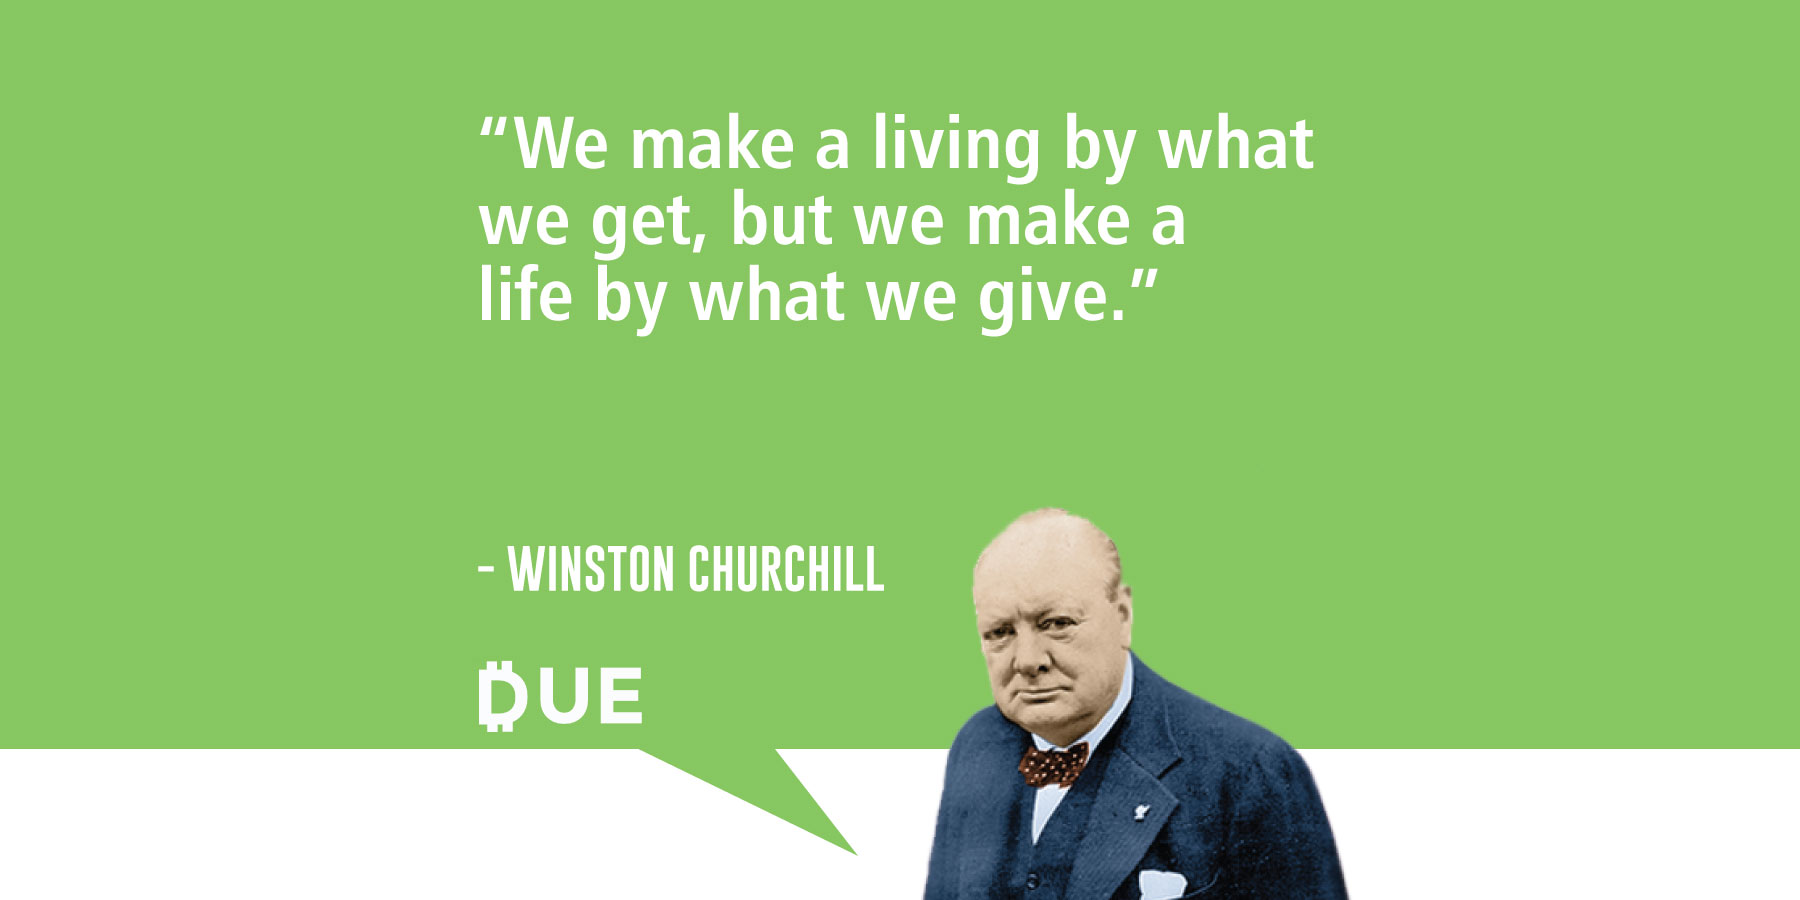 Winston Churchill We Make A Life By What We Give Due